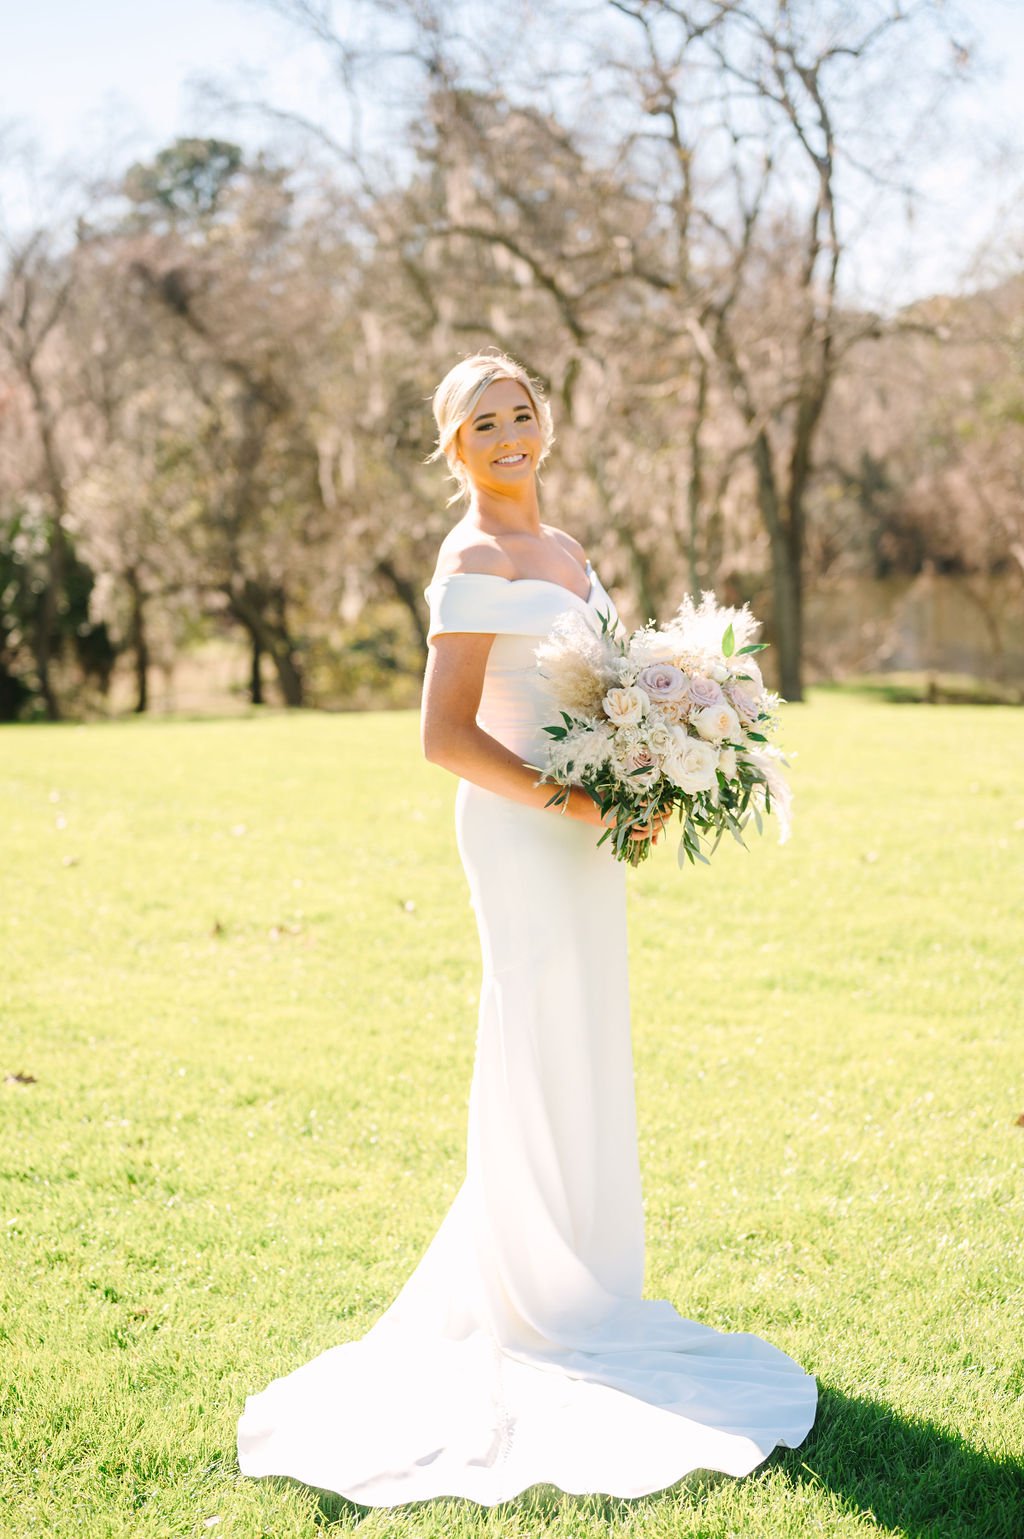 delaney-and-joshuas-real-savannah-wedding-at-red-gate-farms-planned-by-savannah-wedding-planner-ivory-and-beau-with-wedding-florals-from-savannah-wedding-florist-ivory-and-beau-shot-by-5d-photography-savannah-wedding-savannah-bride-1.jpg